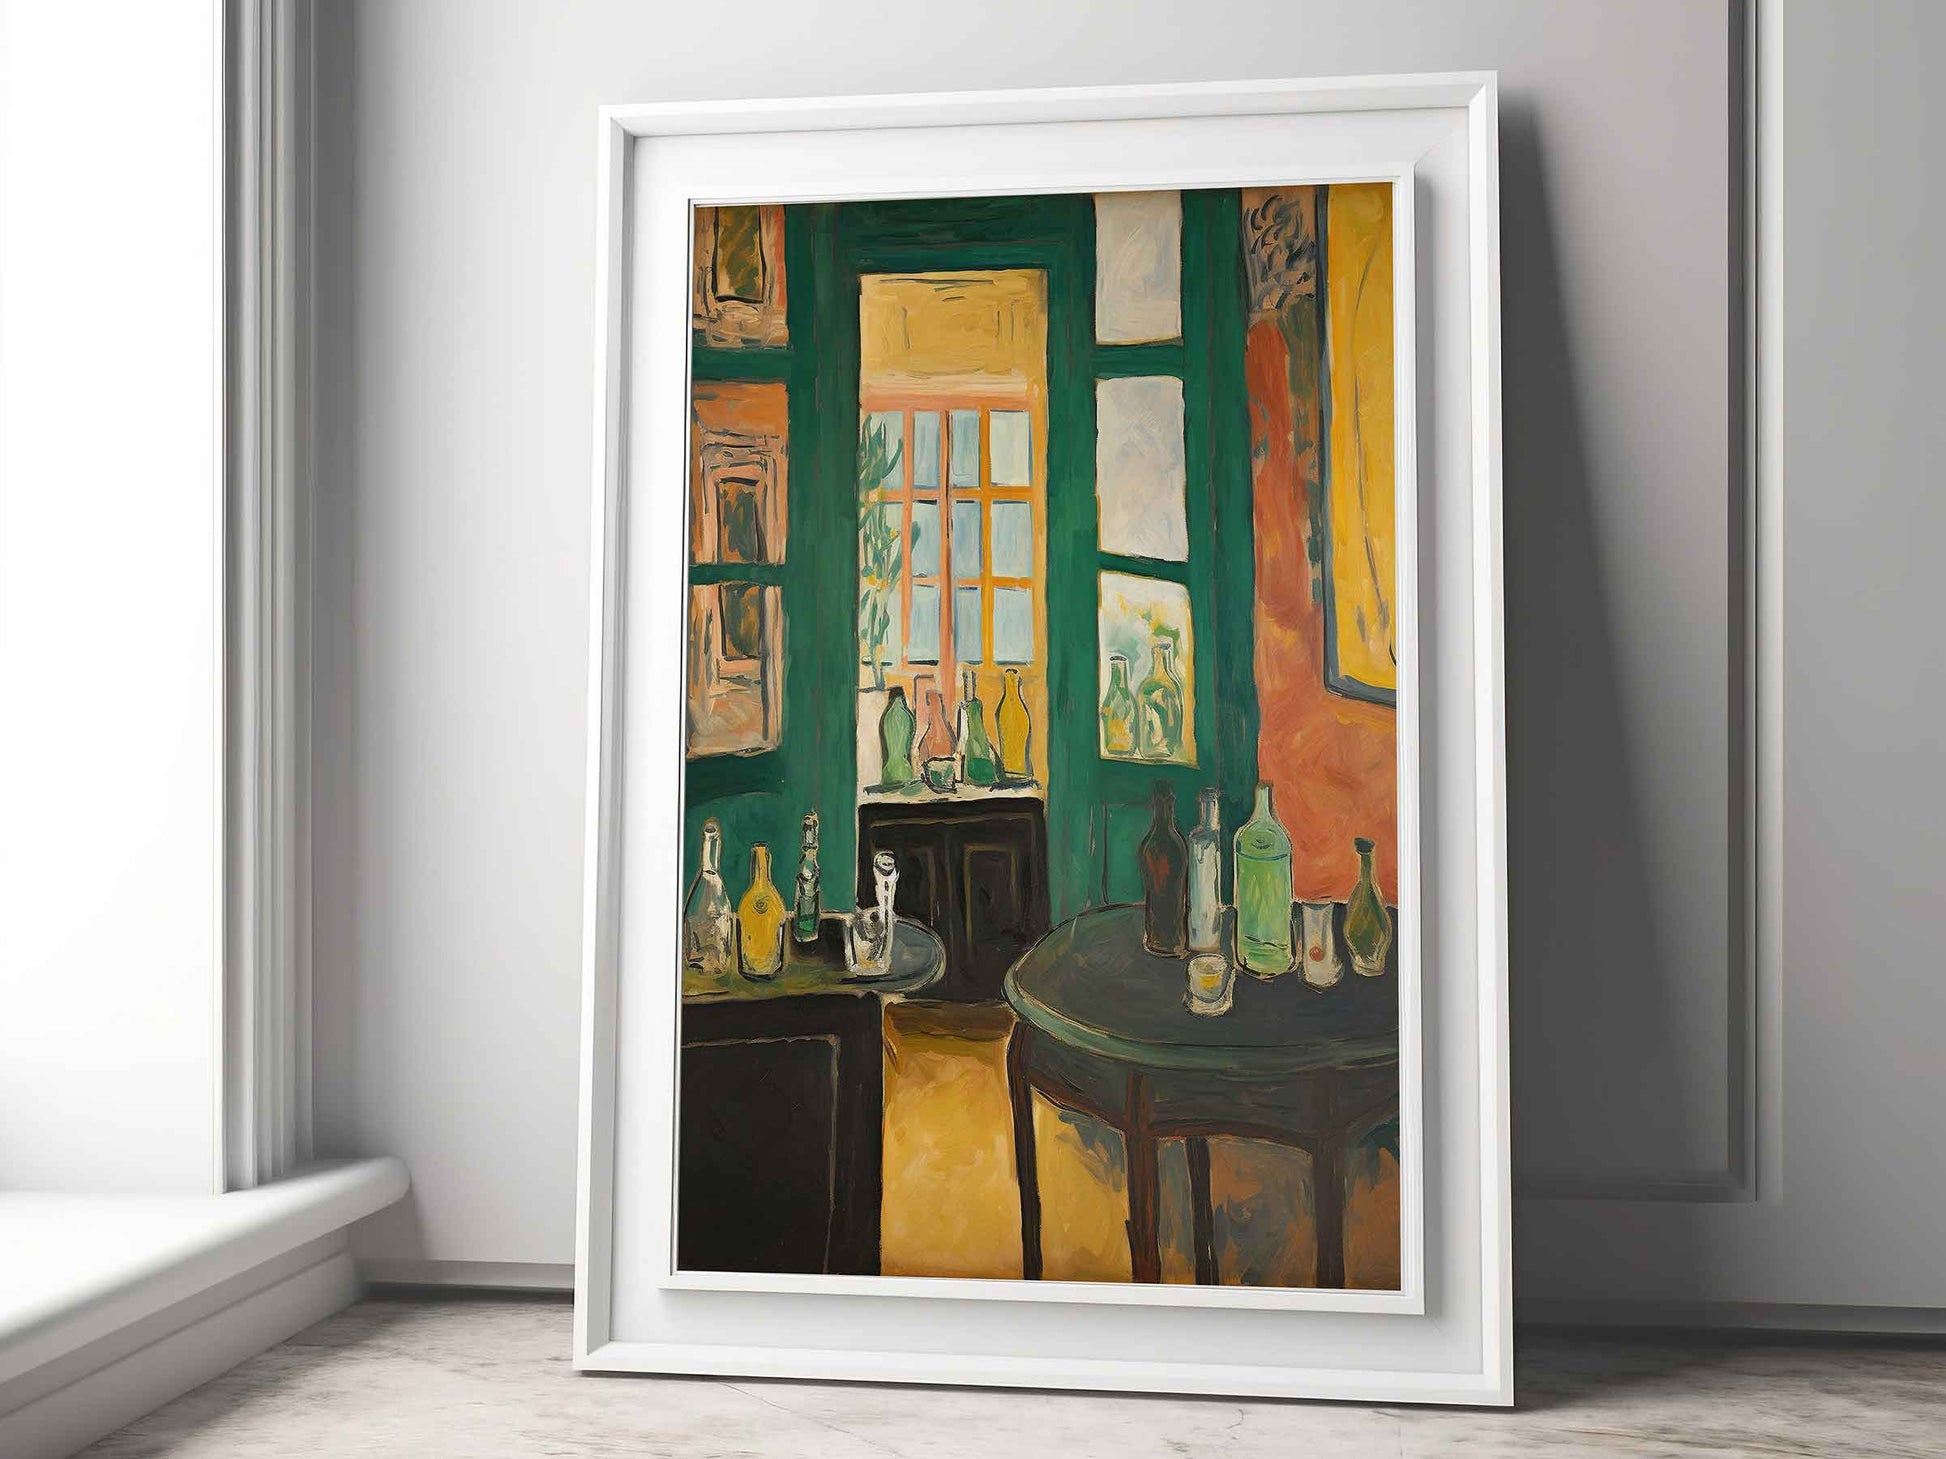 Framed Image of Matisse Style Art Wall Poster Prints Garden & Window Oil Paintings